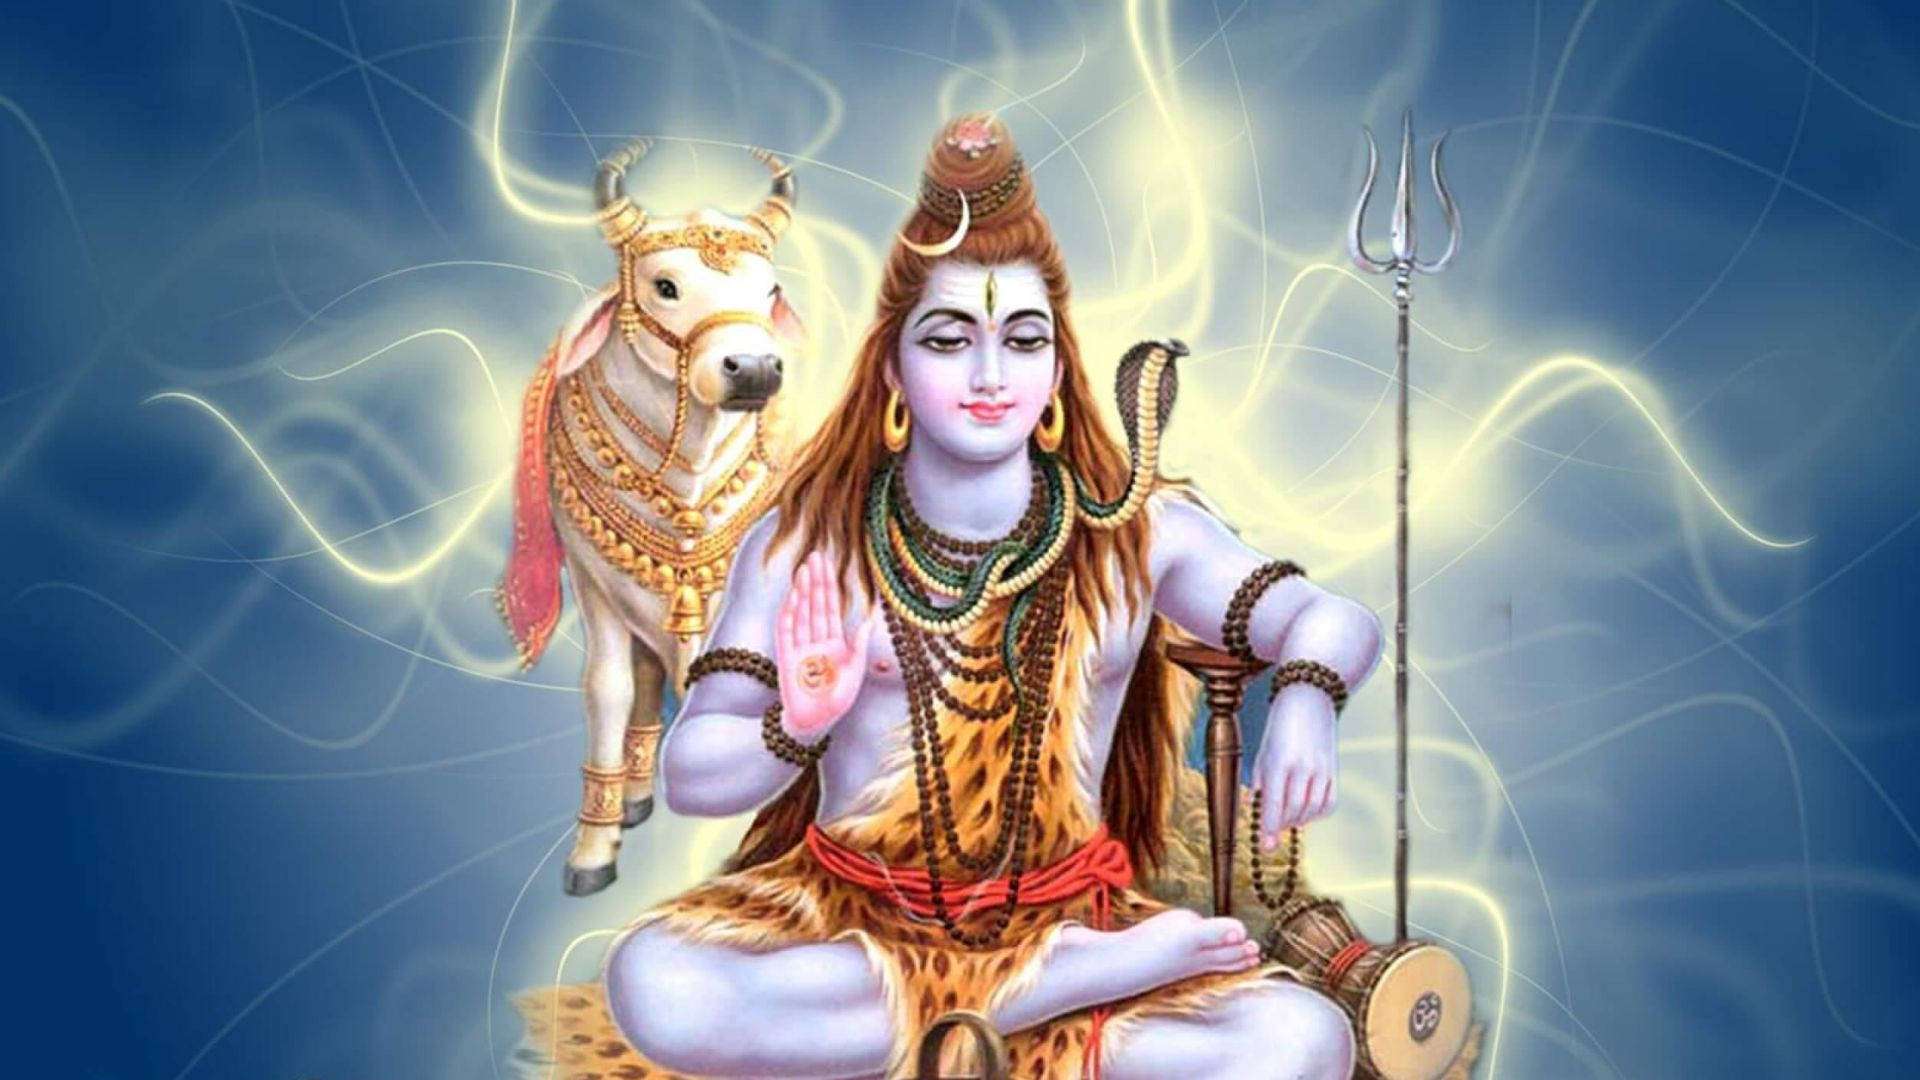 Free Lord Shiva Hd Wallpaper Downloads, [200+] Lord Shiva Hd Wallpapers for  FREE 